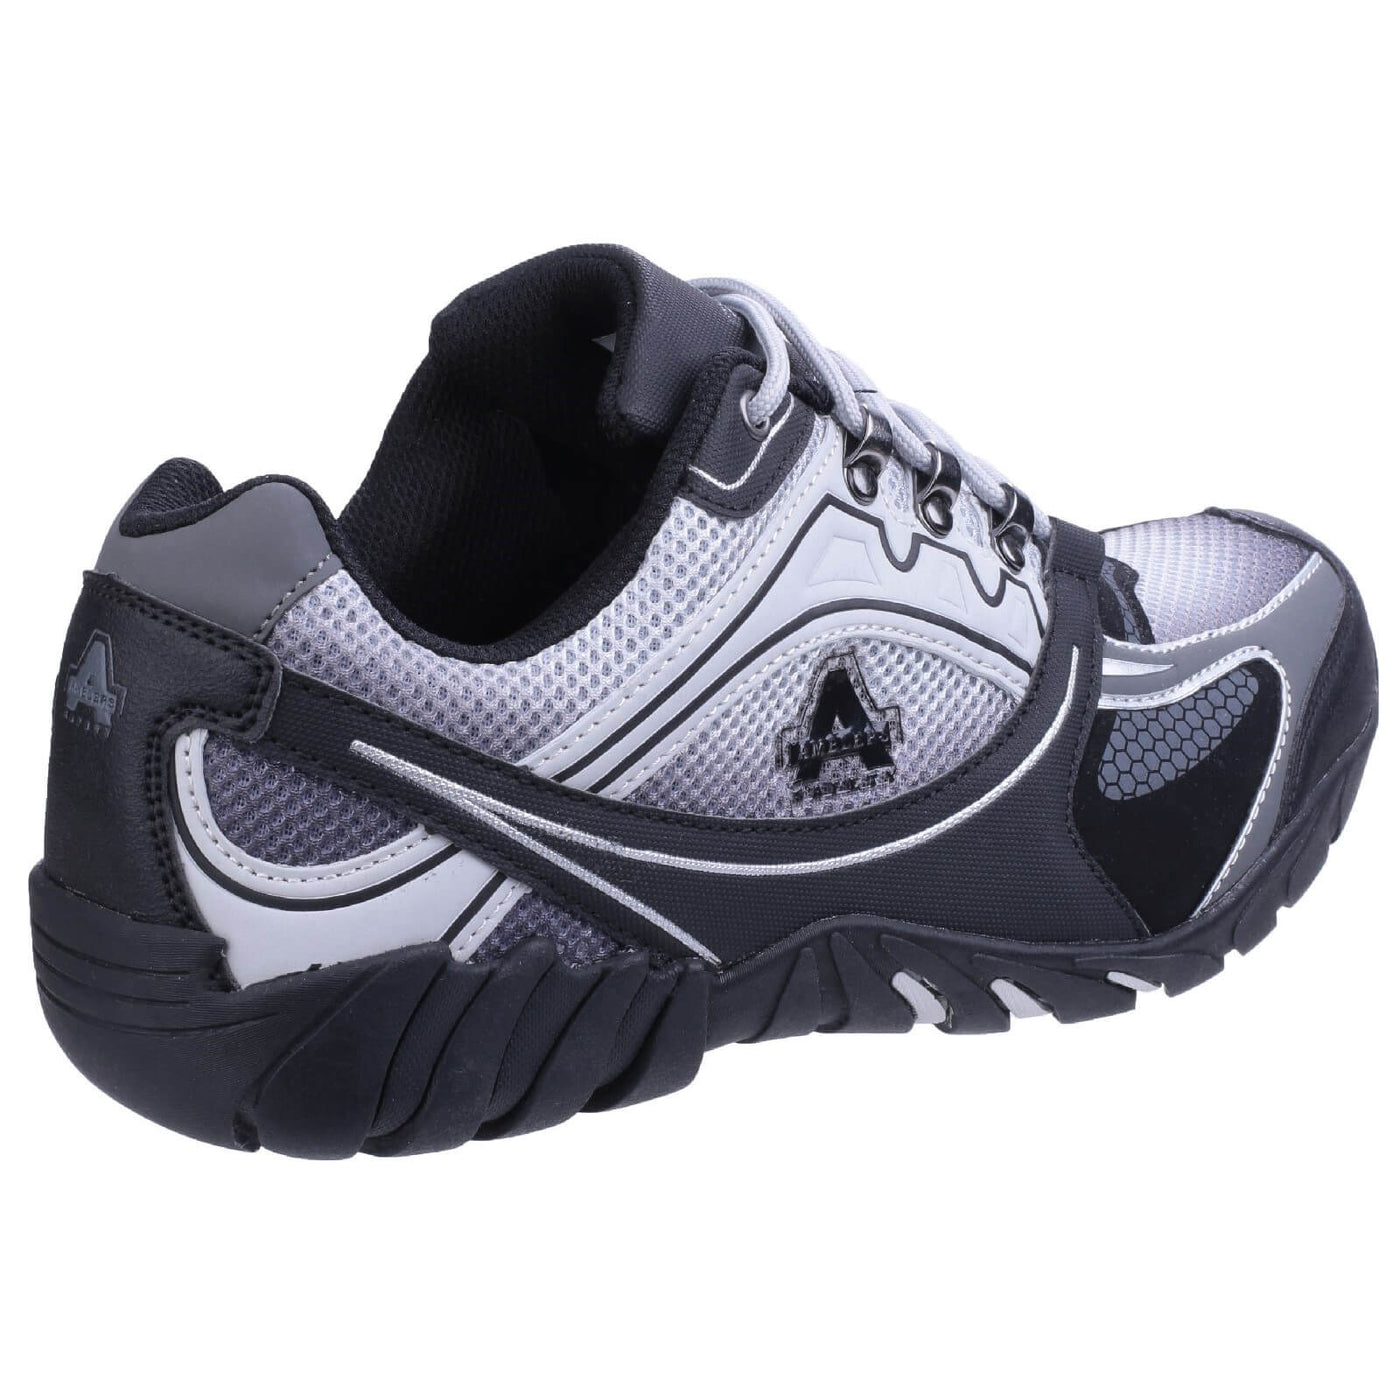 Amblers FS702 Granite Vegan Anti-static Lace-up Safety Trainers Grey 2#colour_grey